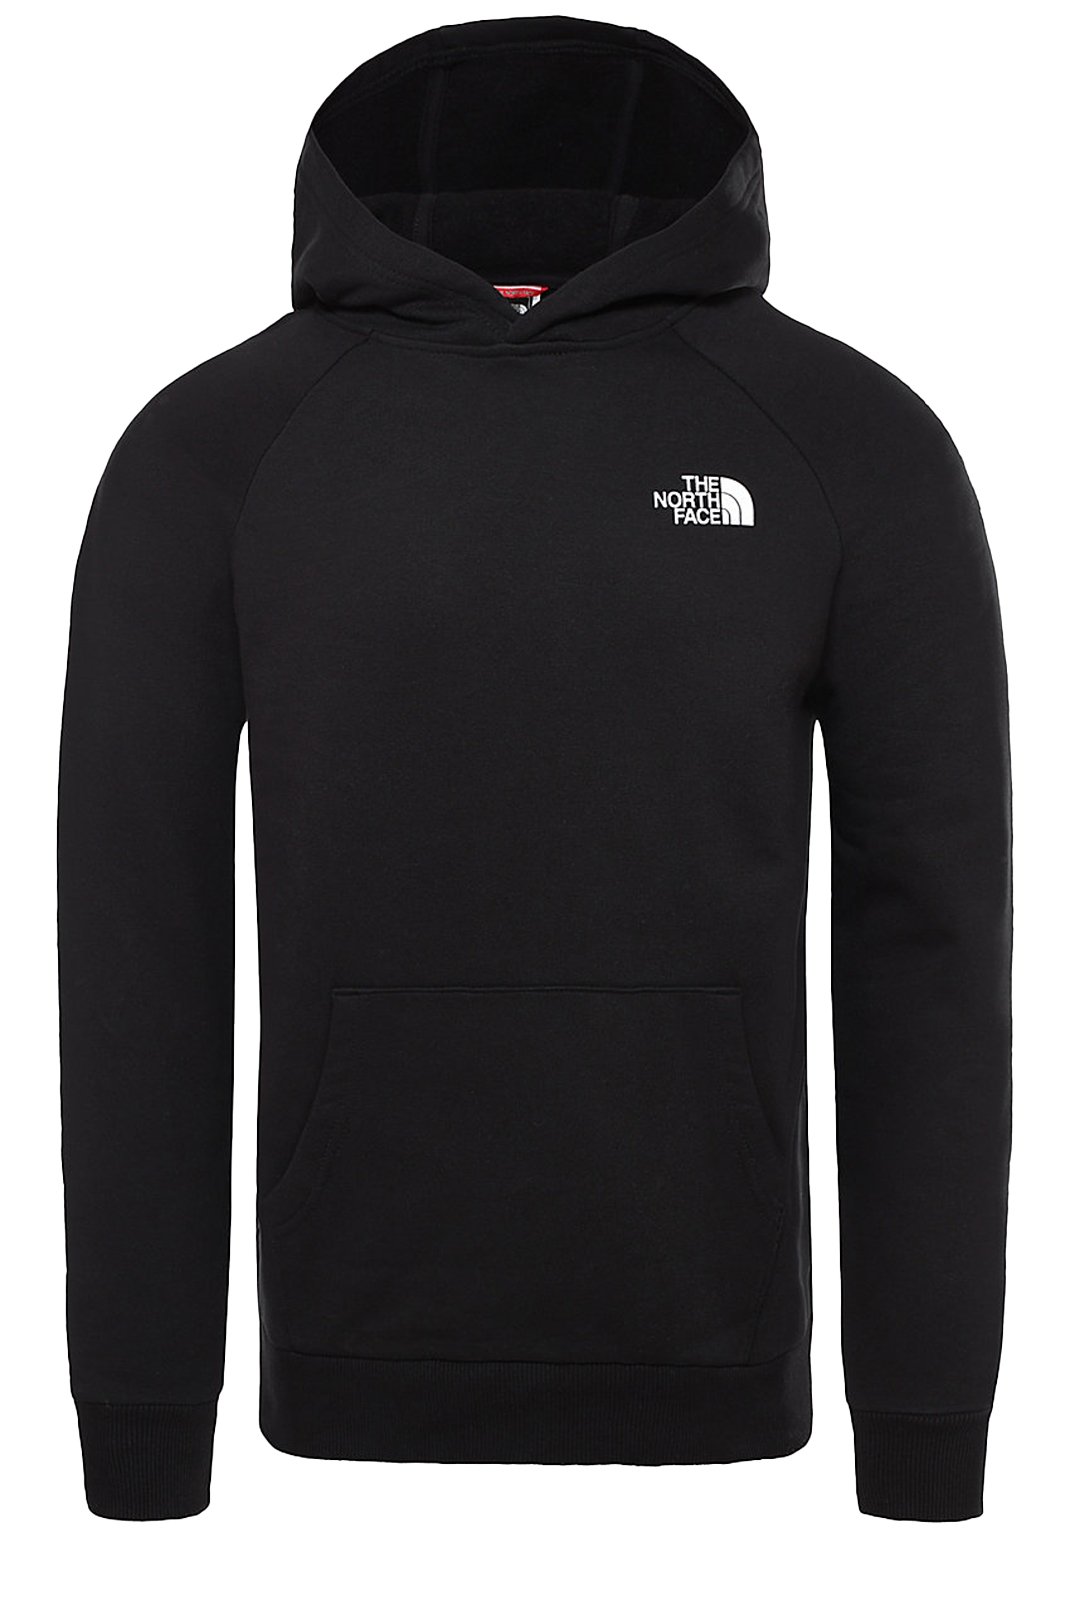 Sweatshirts  The North Face NF0A2ZWUKY41 BLACK